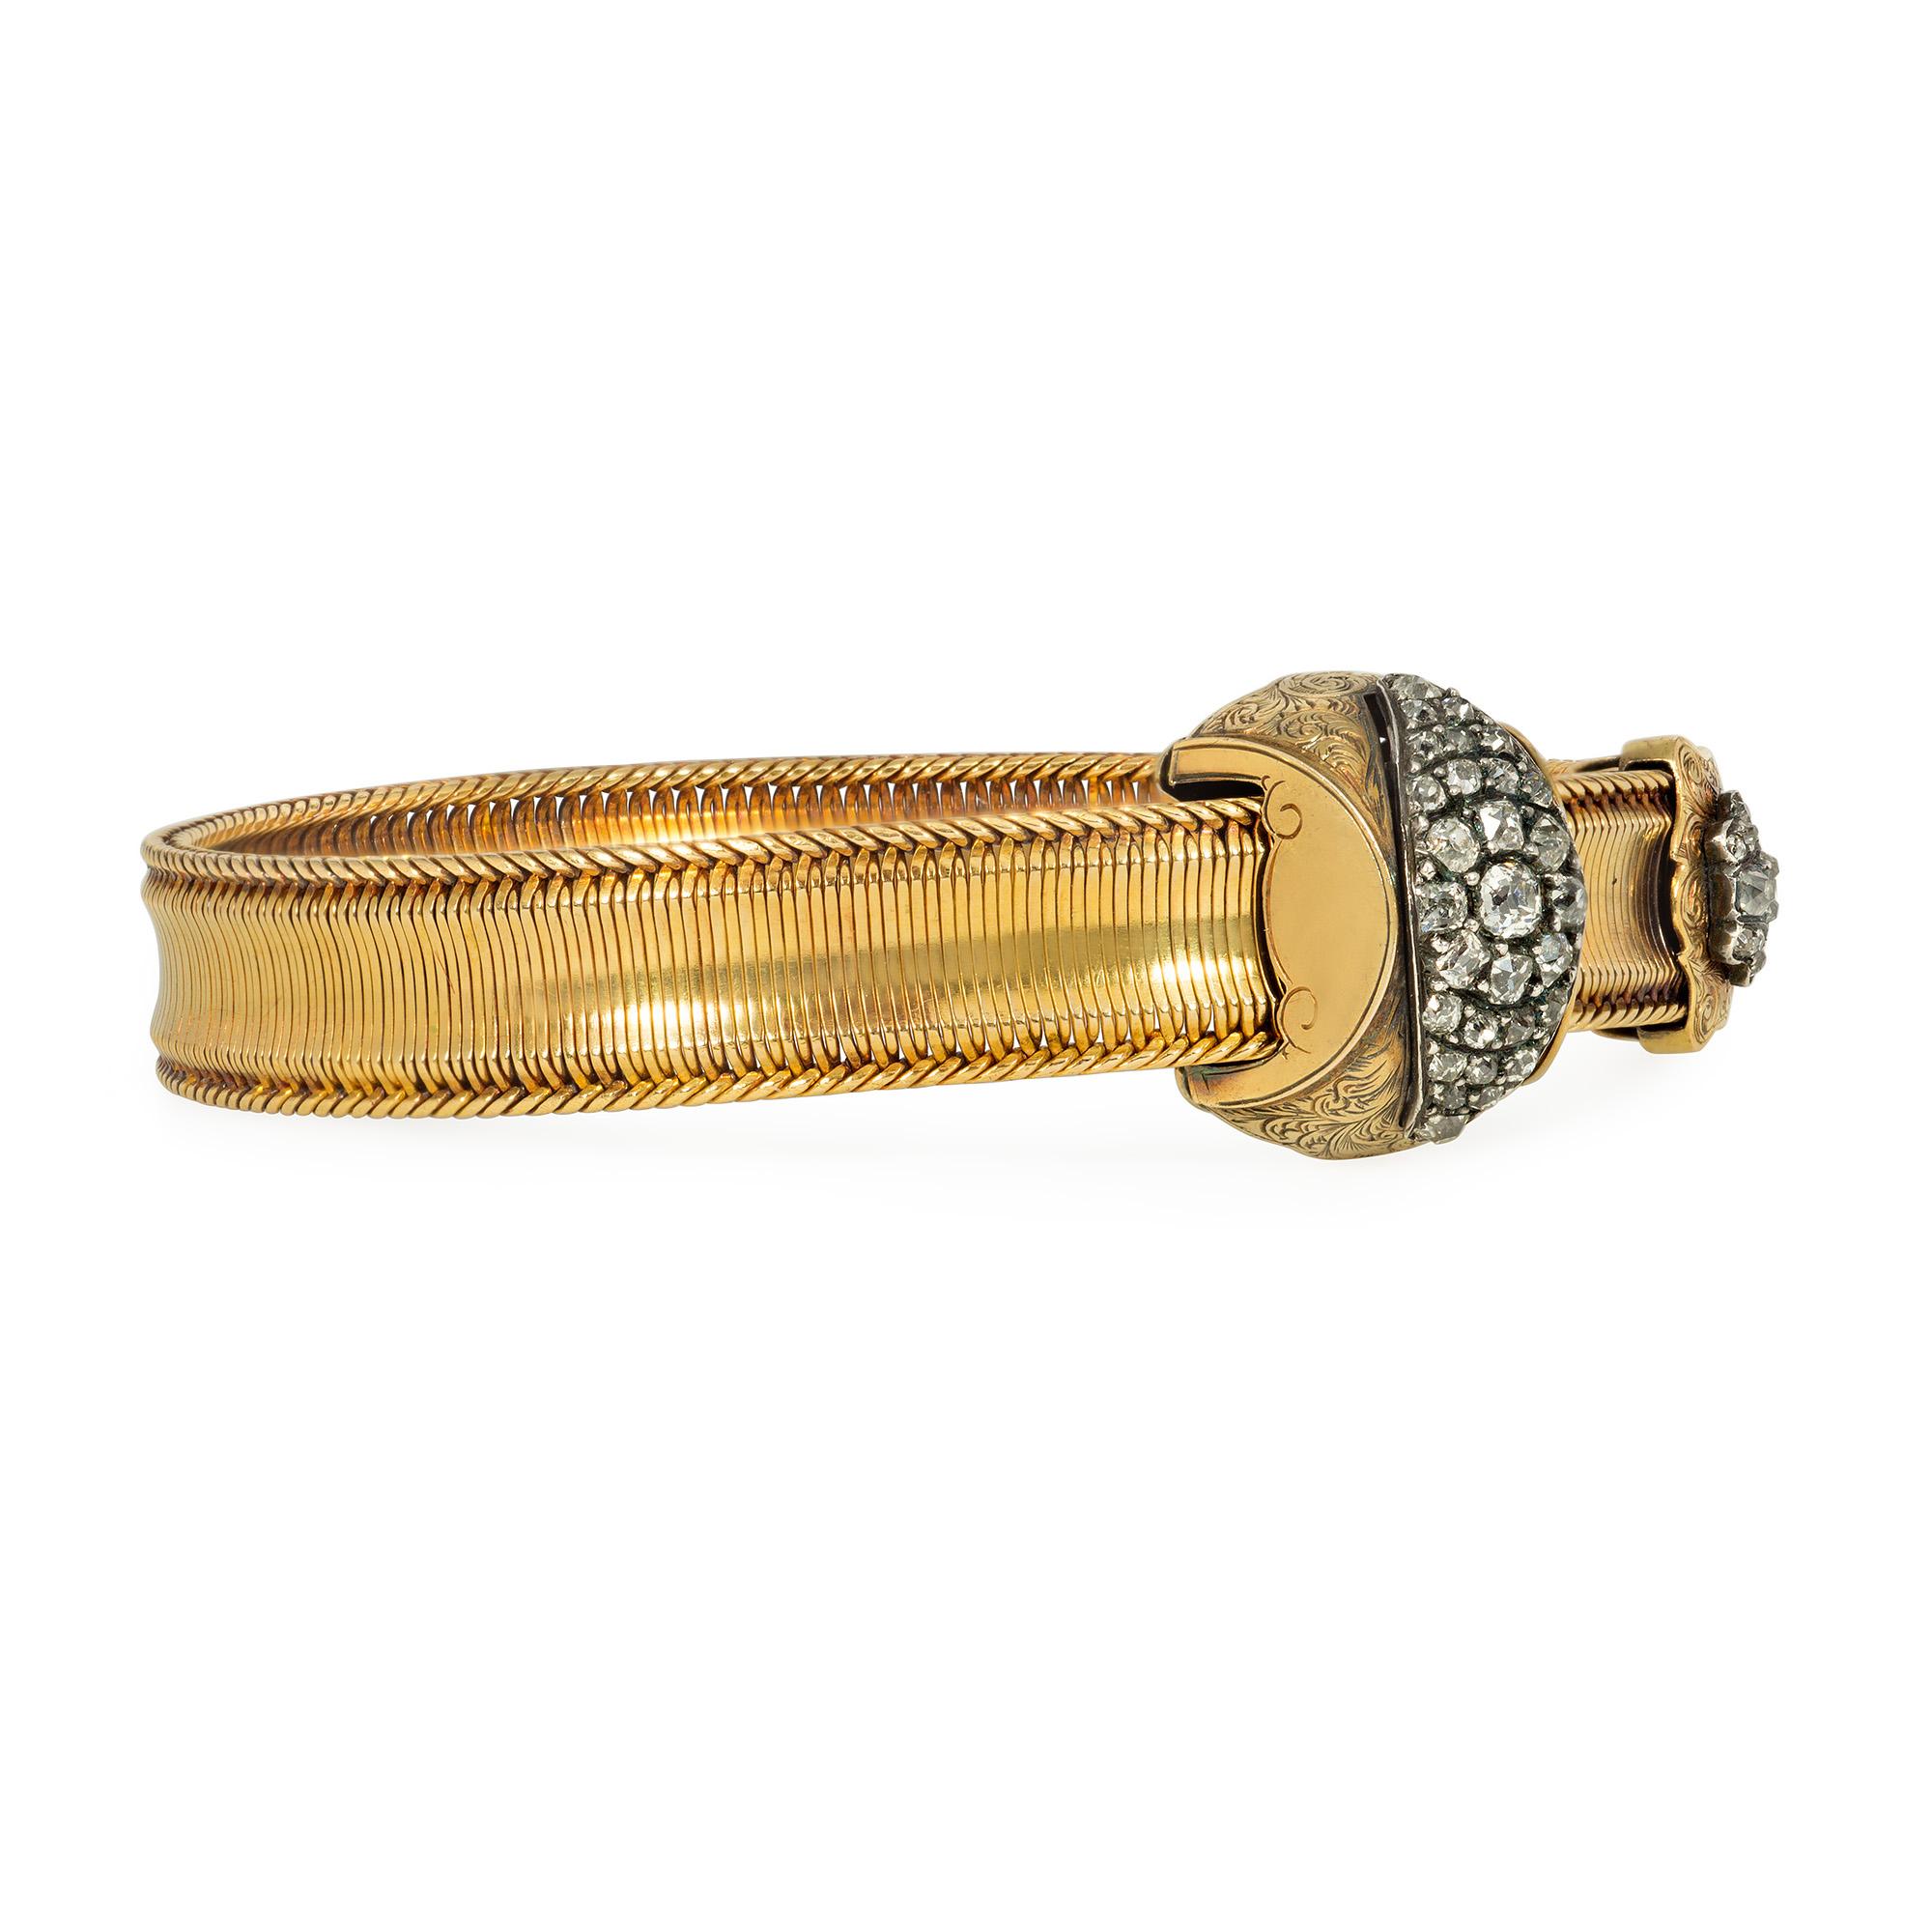 An antique Victorian period gold and diamond jarretière (garter) bracelet, the woven gold strap fitted through a gold buckle engraved with an arabesque design and set with diamonds in a radiating lozenge pattern, and terminating in a similarly